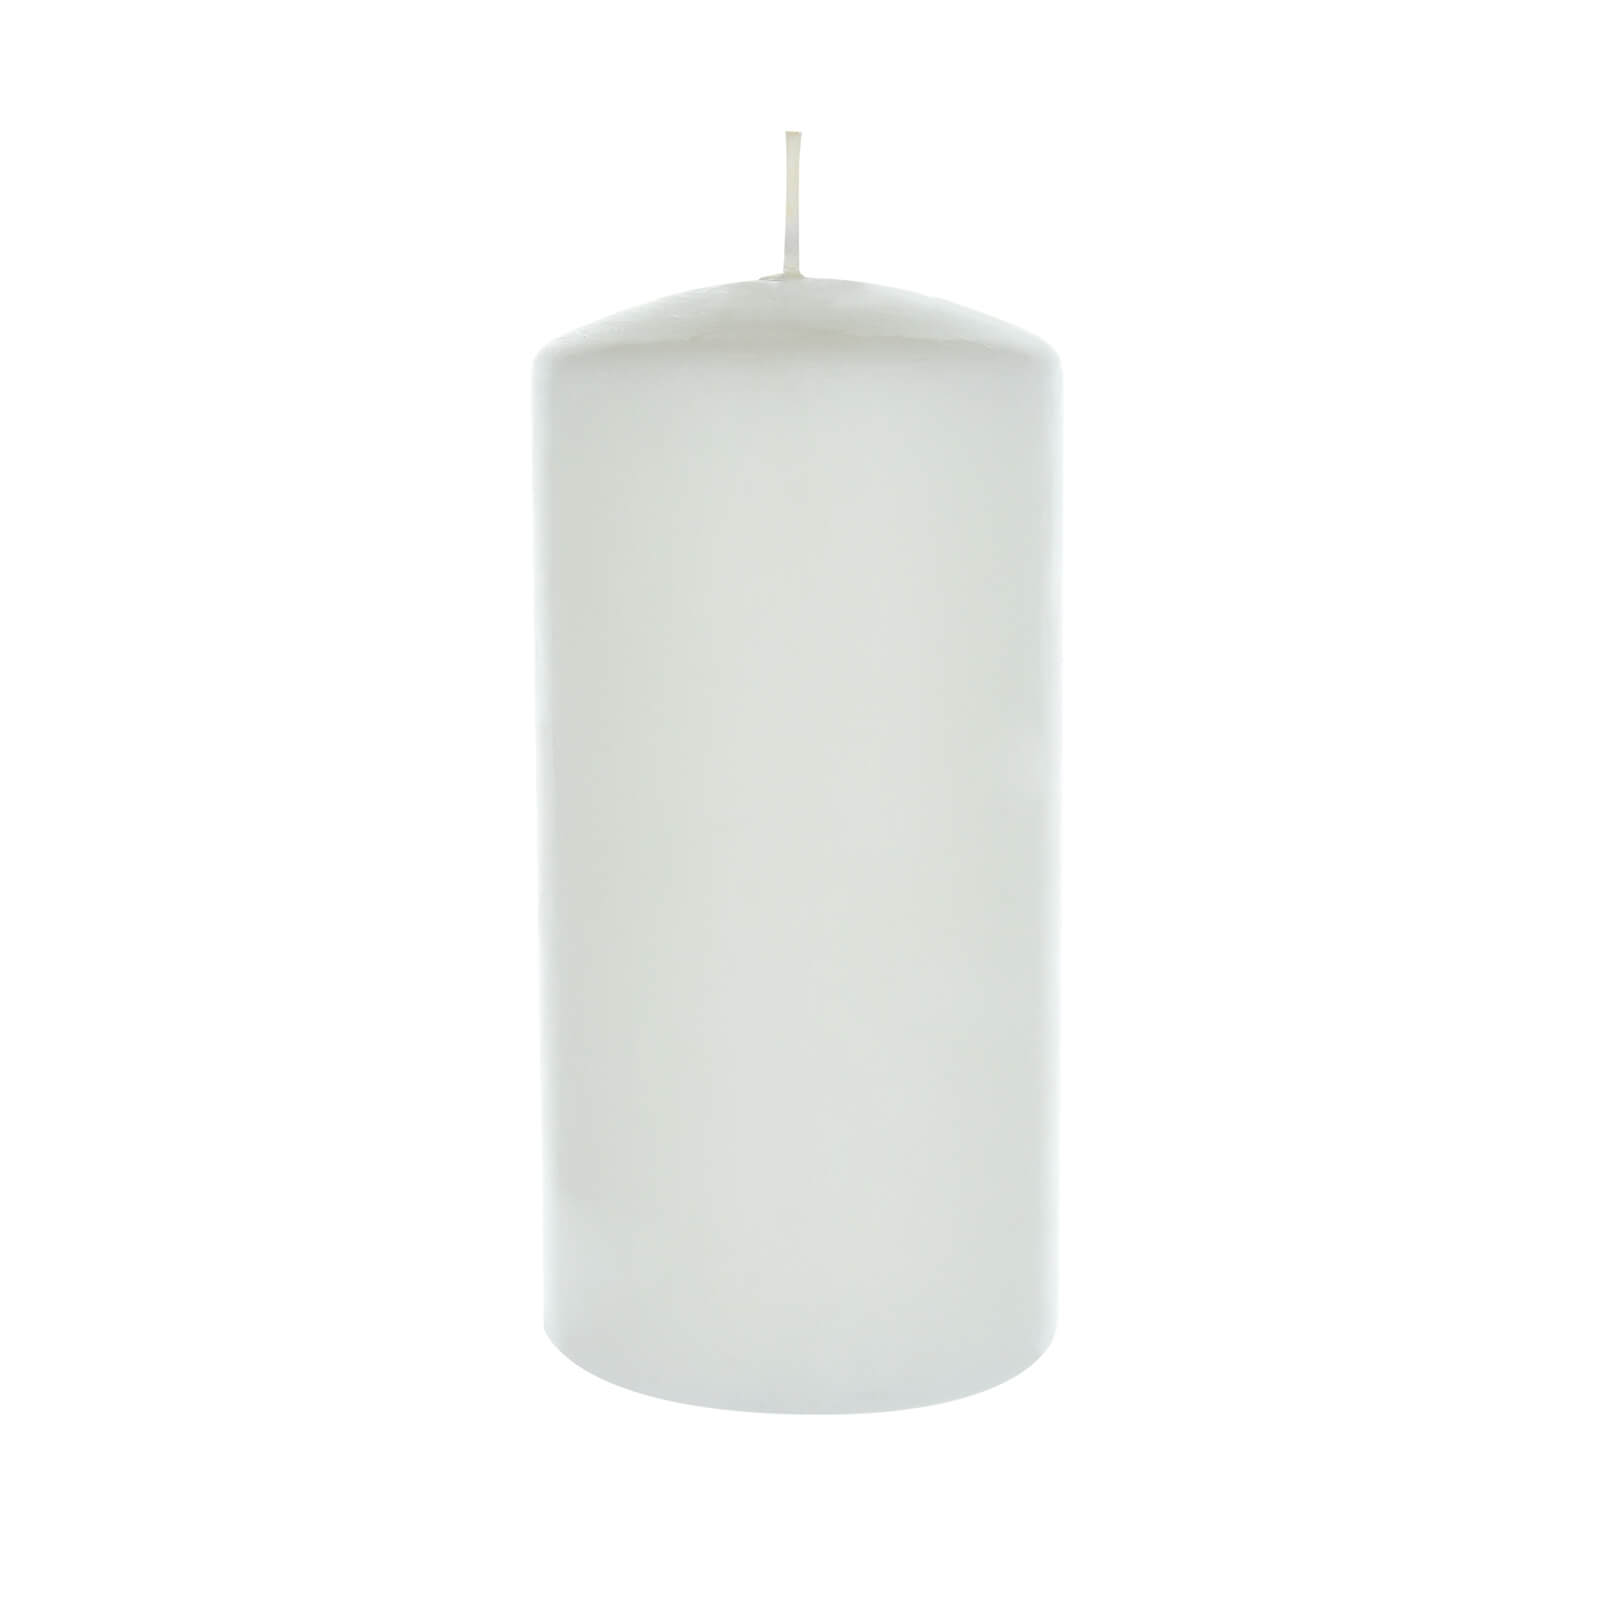 Unscented White Pillar Candle - 15cm